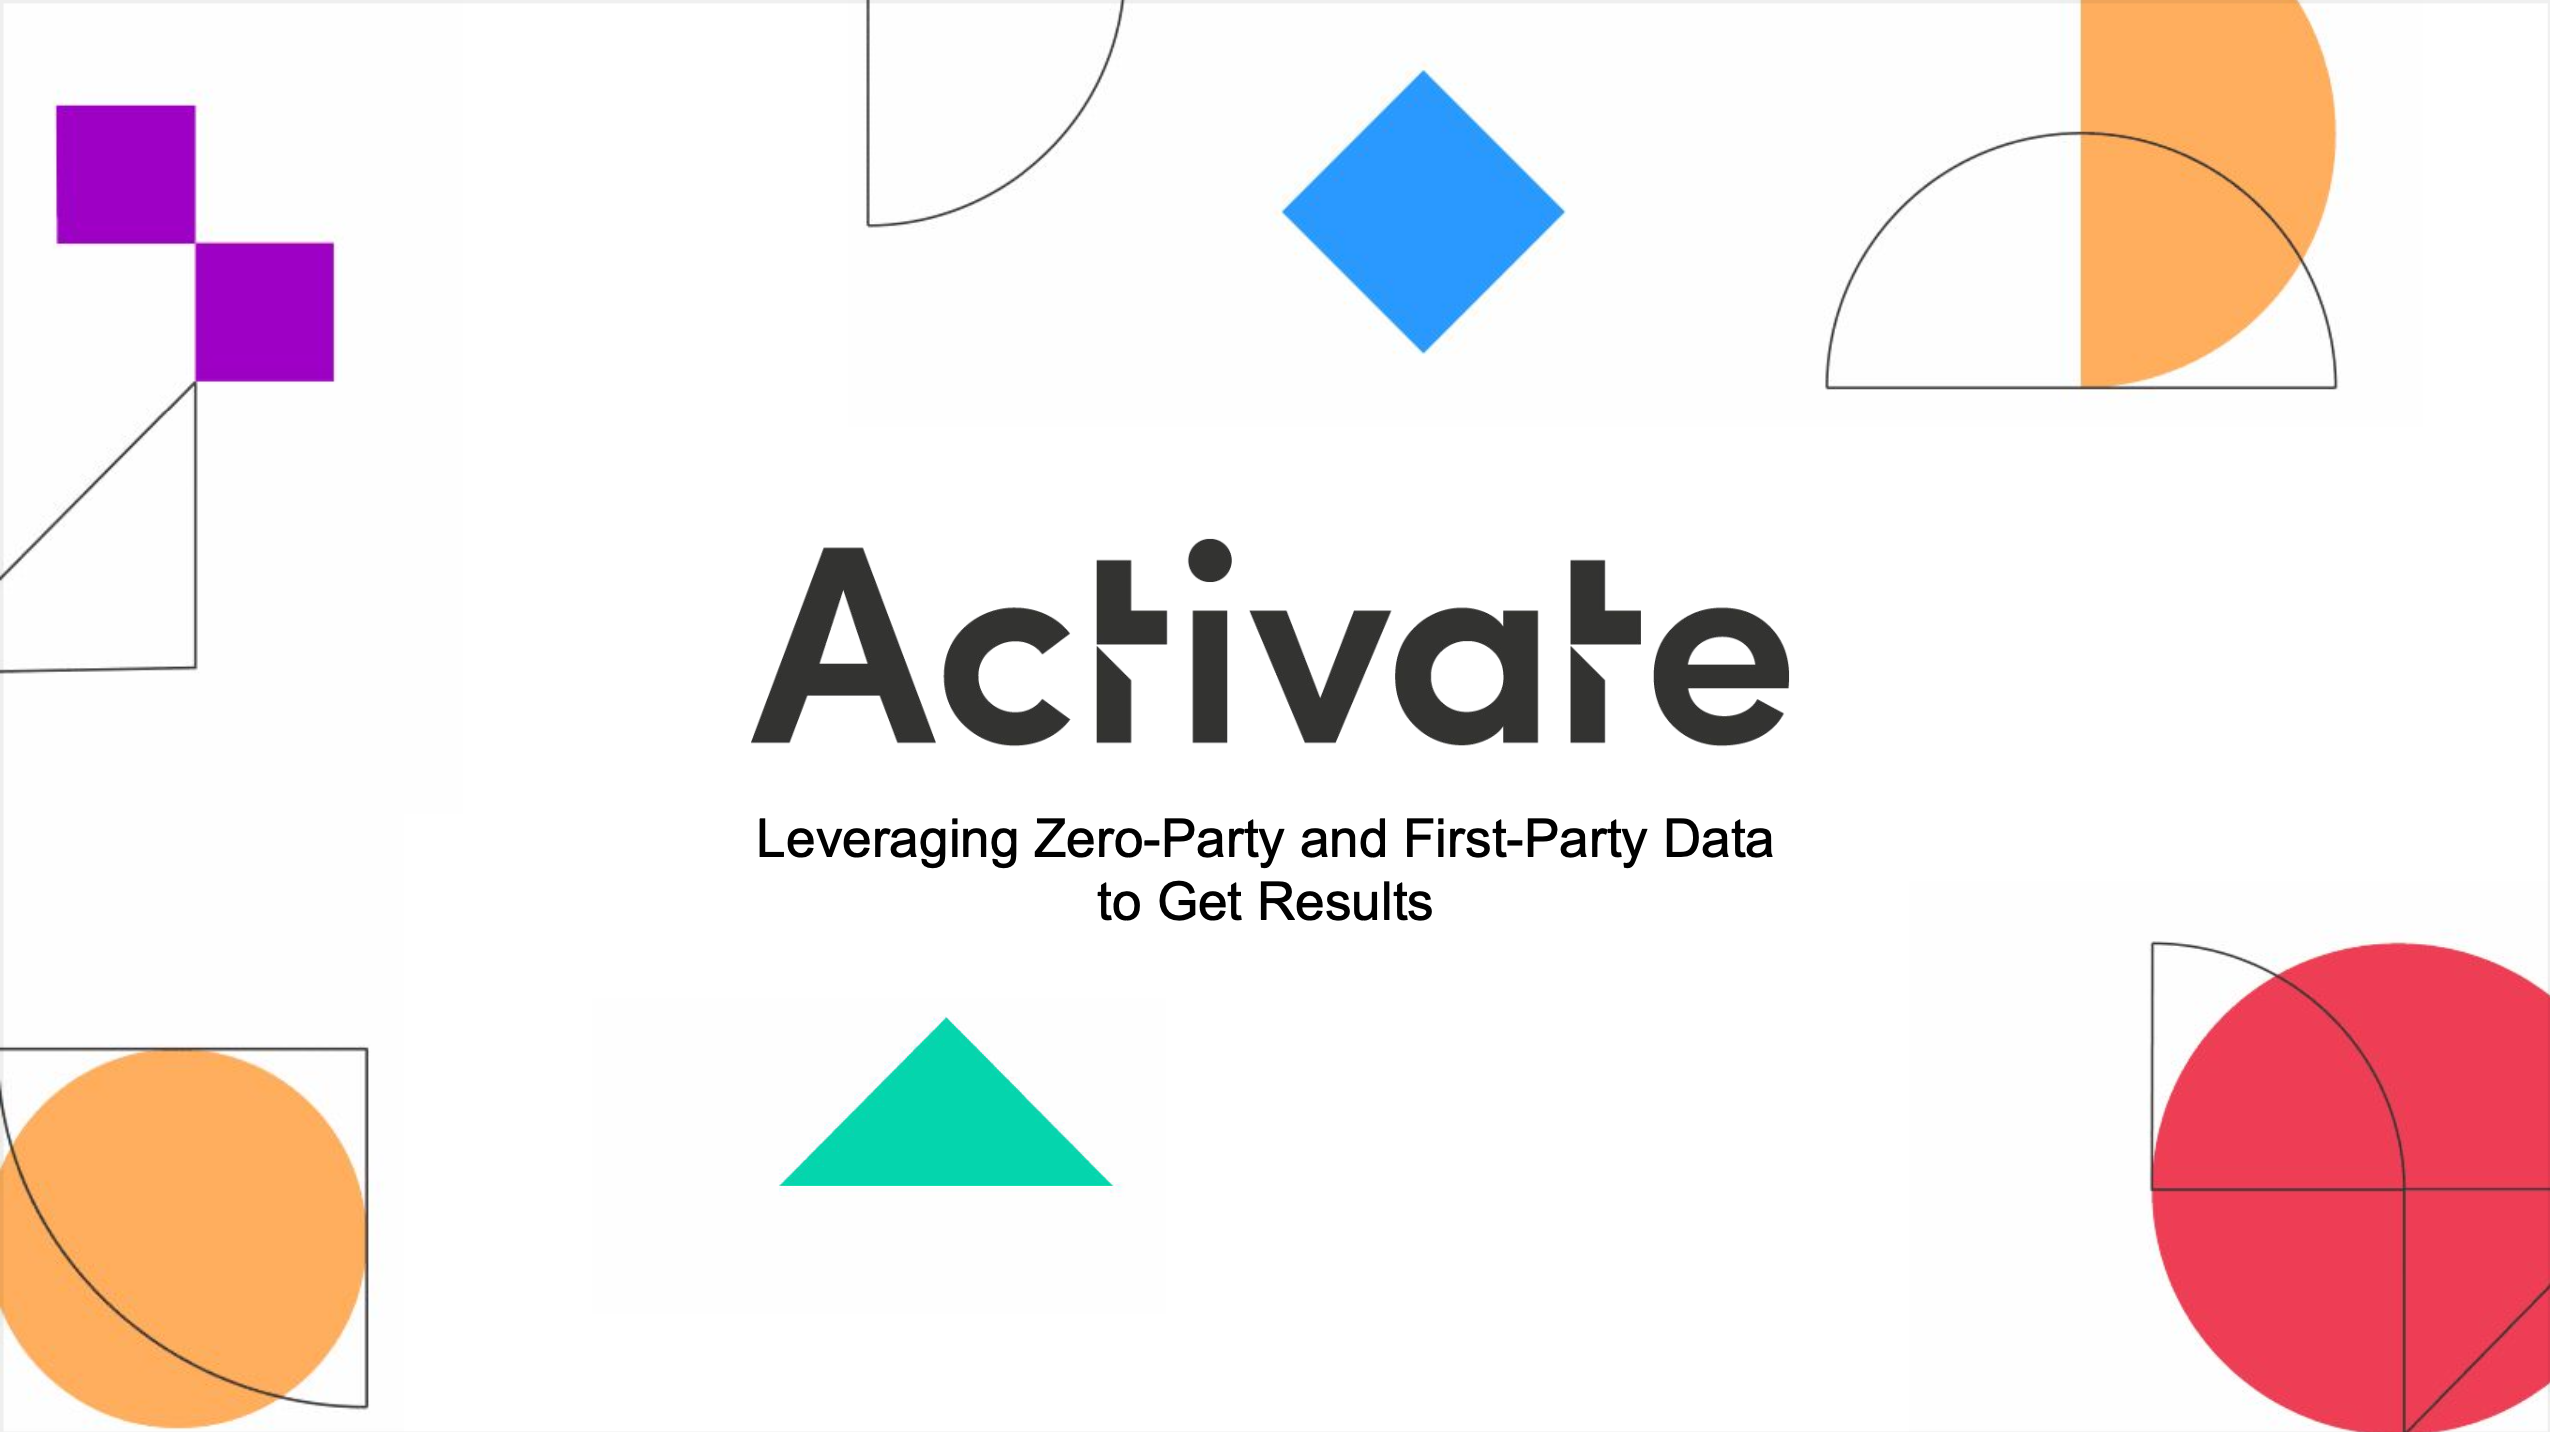 Leveraging Zero-Party and First-Party Data to Get Results